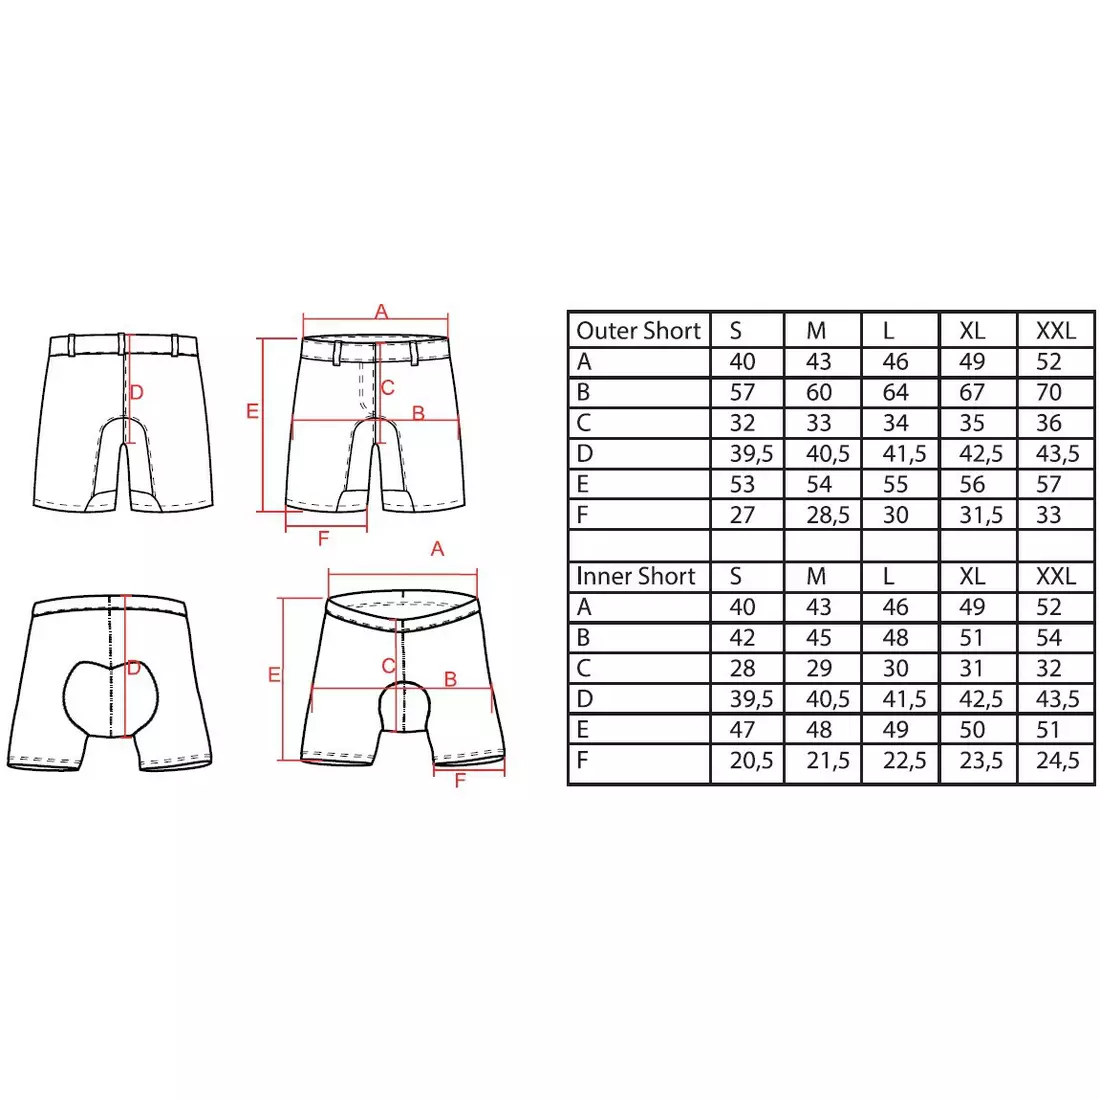 FORCE Cycling shorts 2w1 MTB-11, gray-red 900330